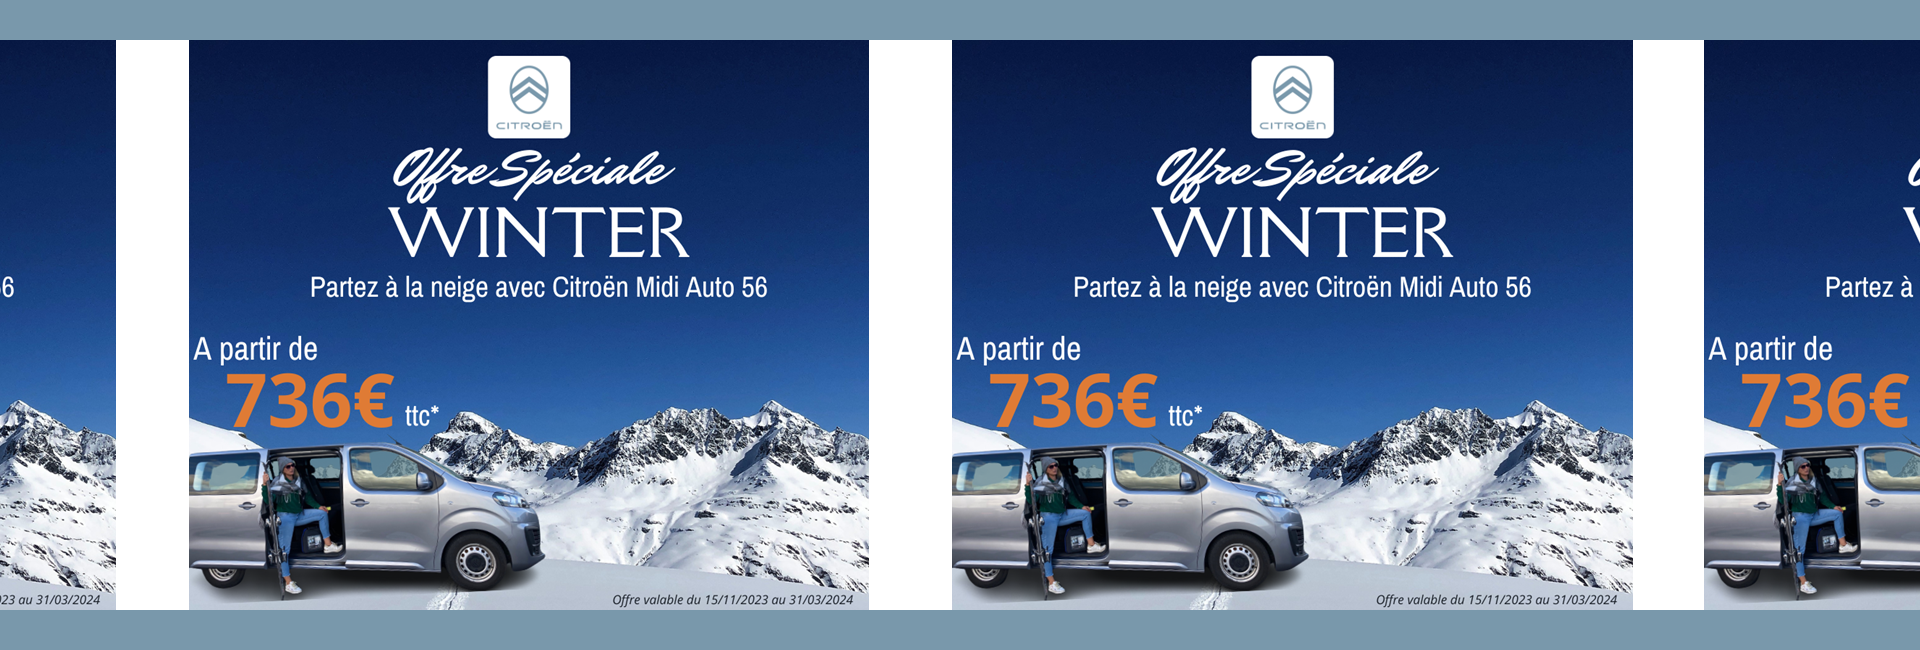 Offre speciale hiver